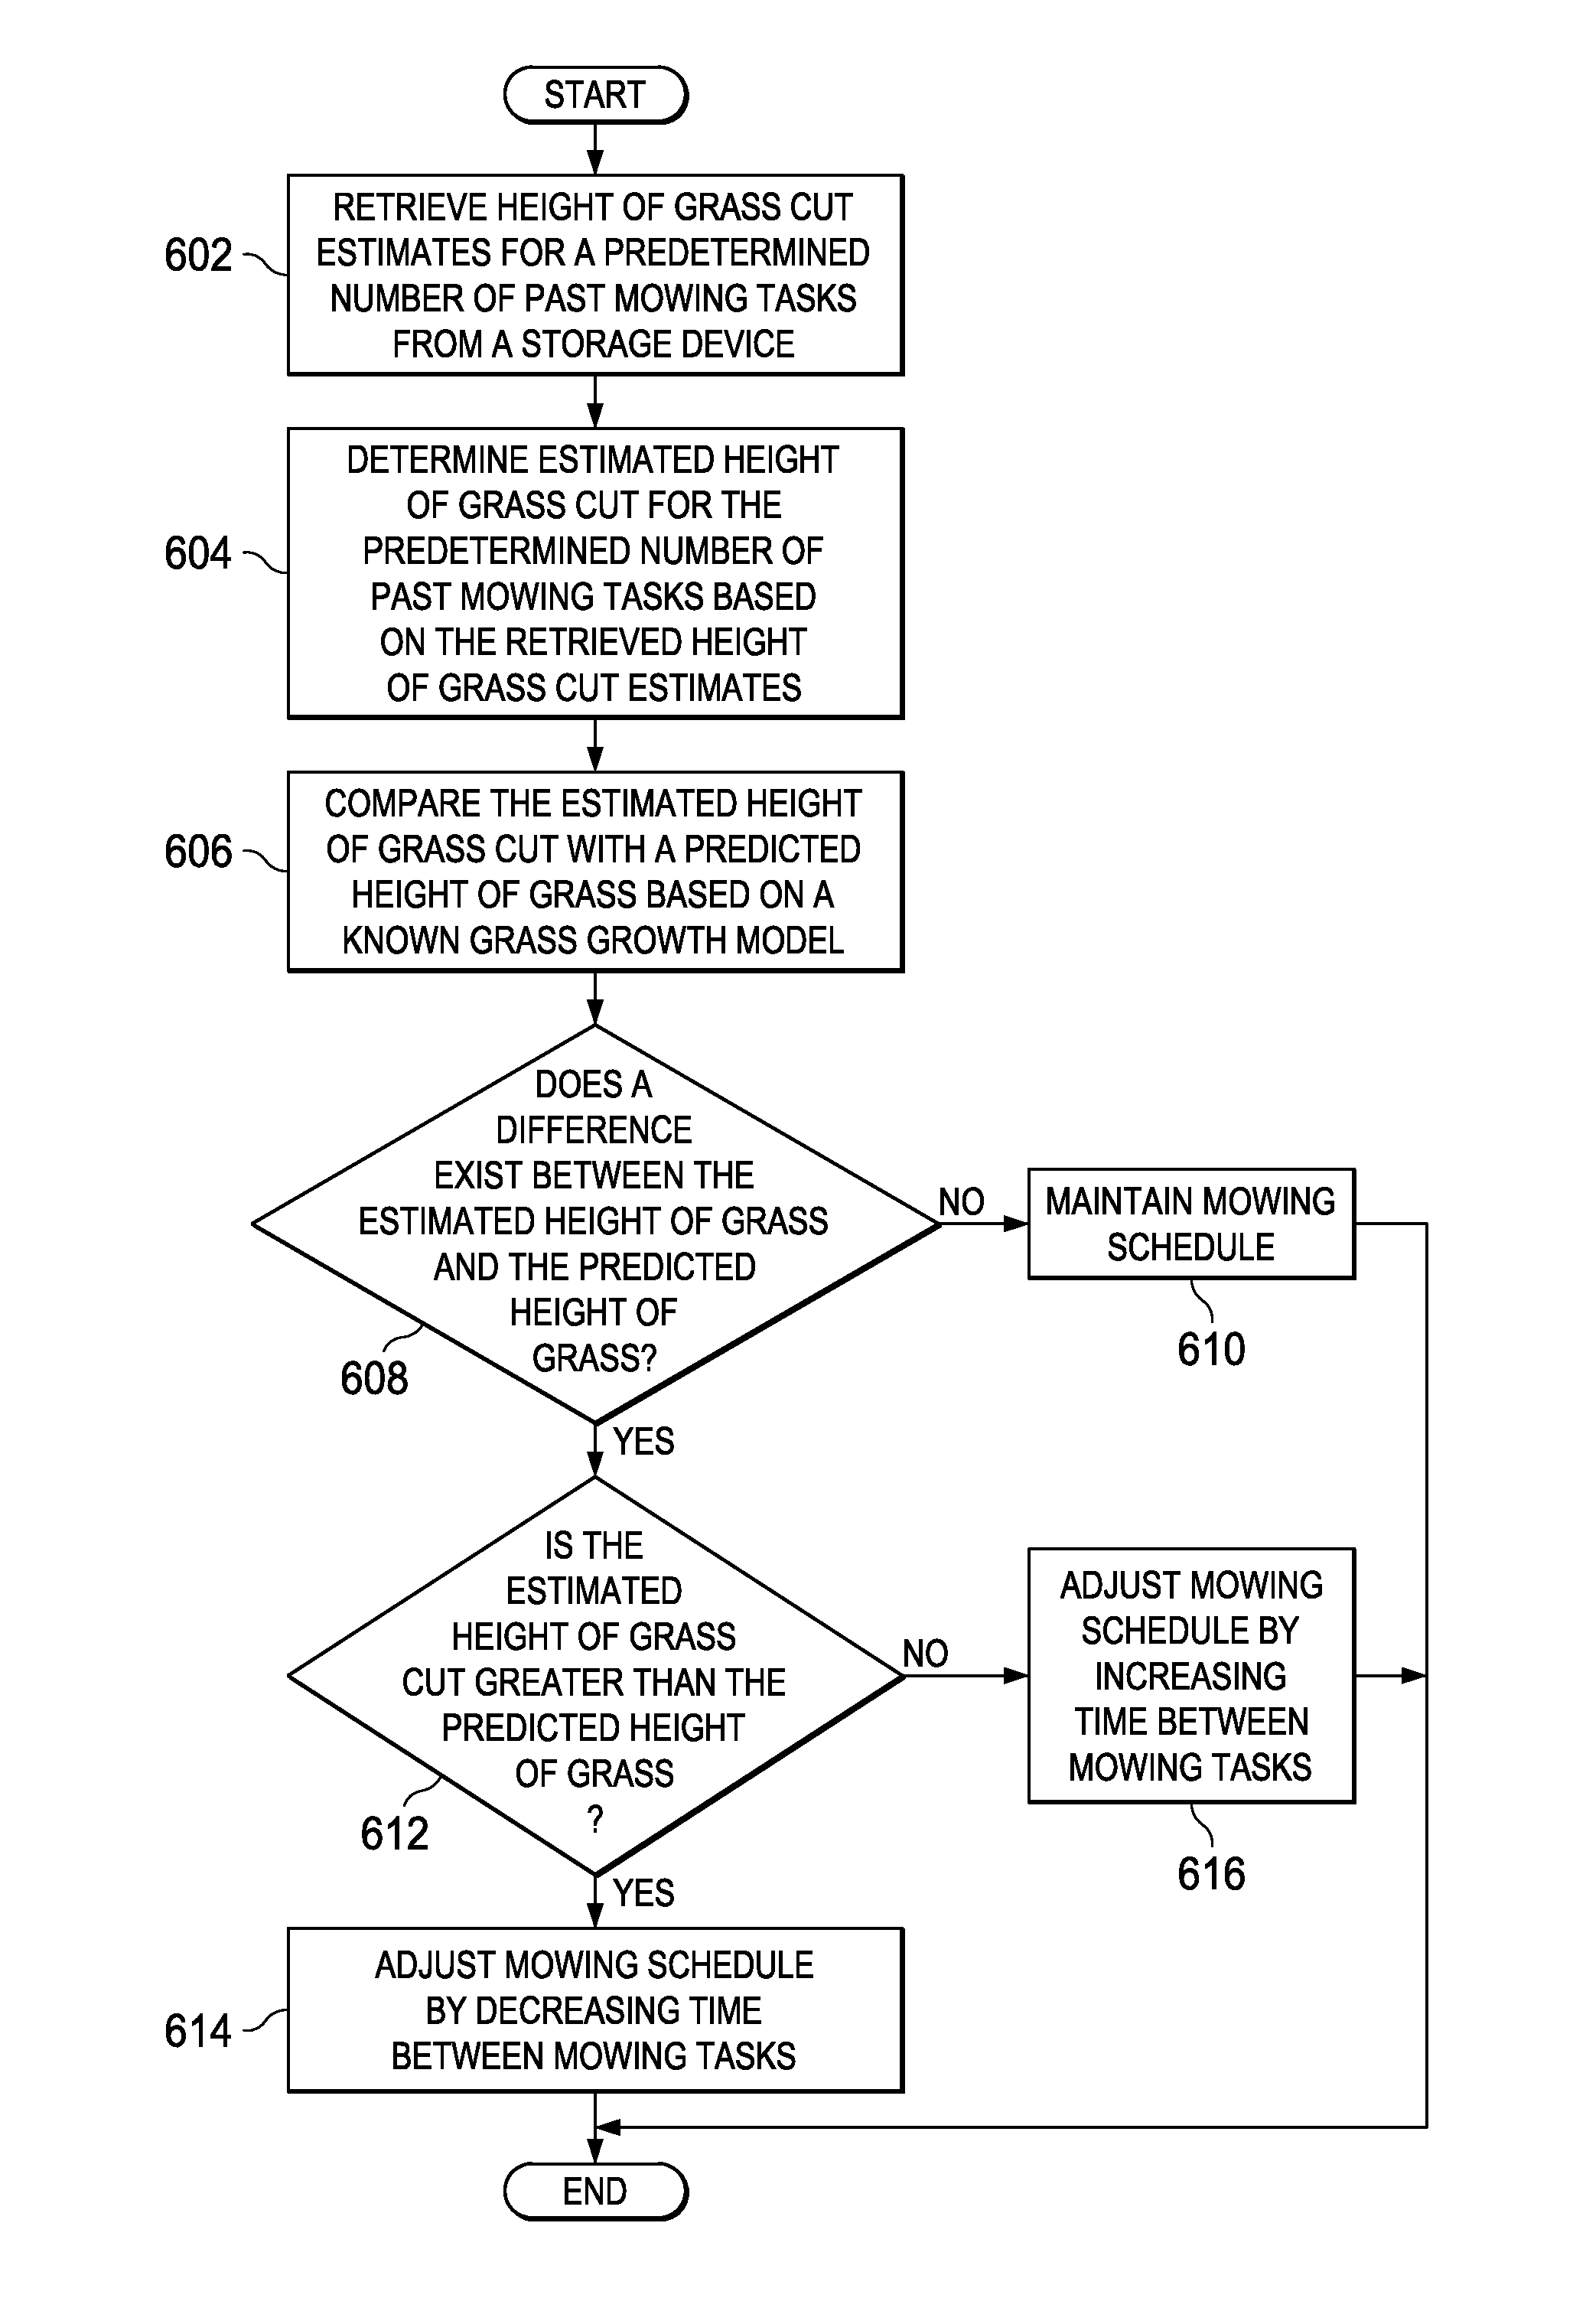 Adaptive scheduling of a service robot